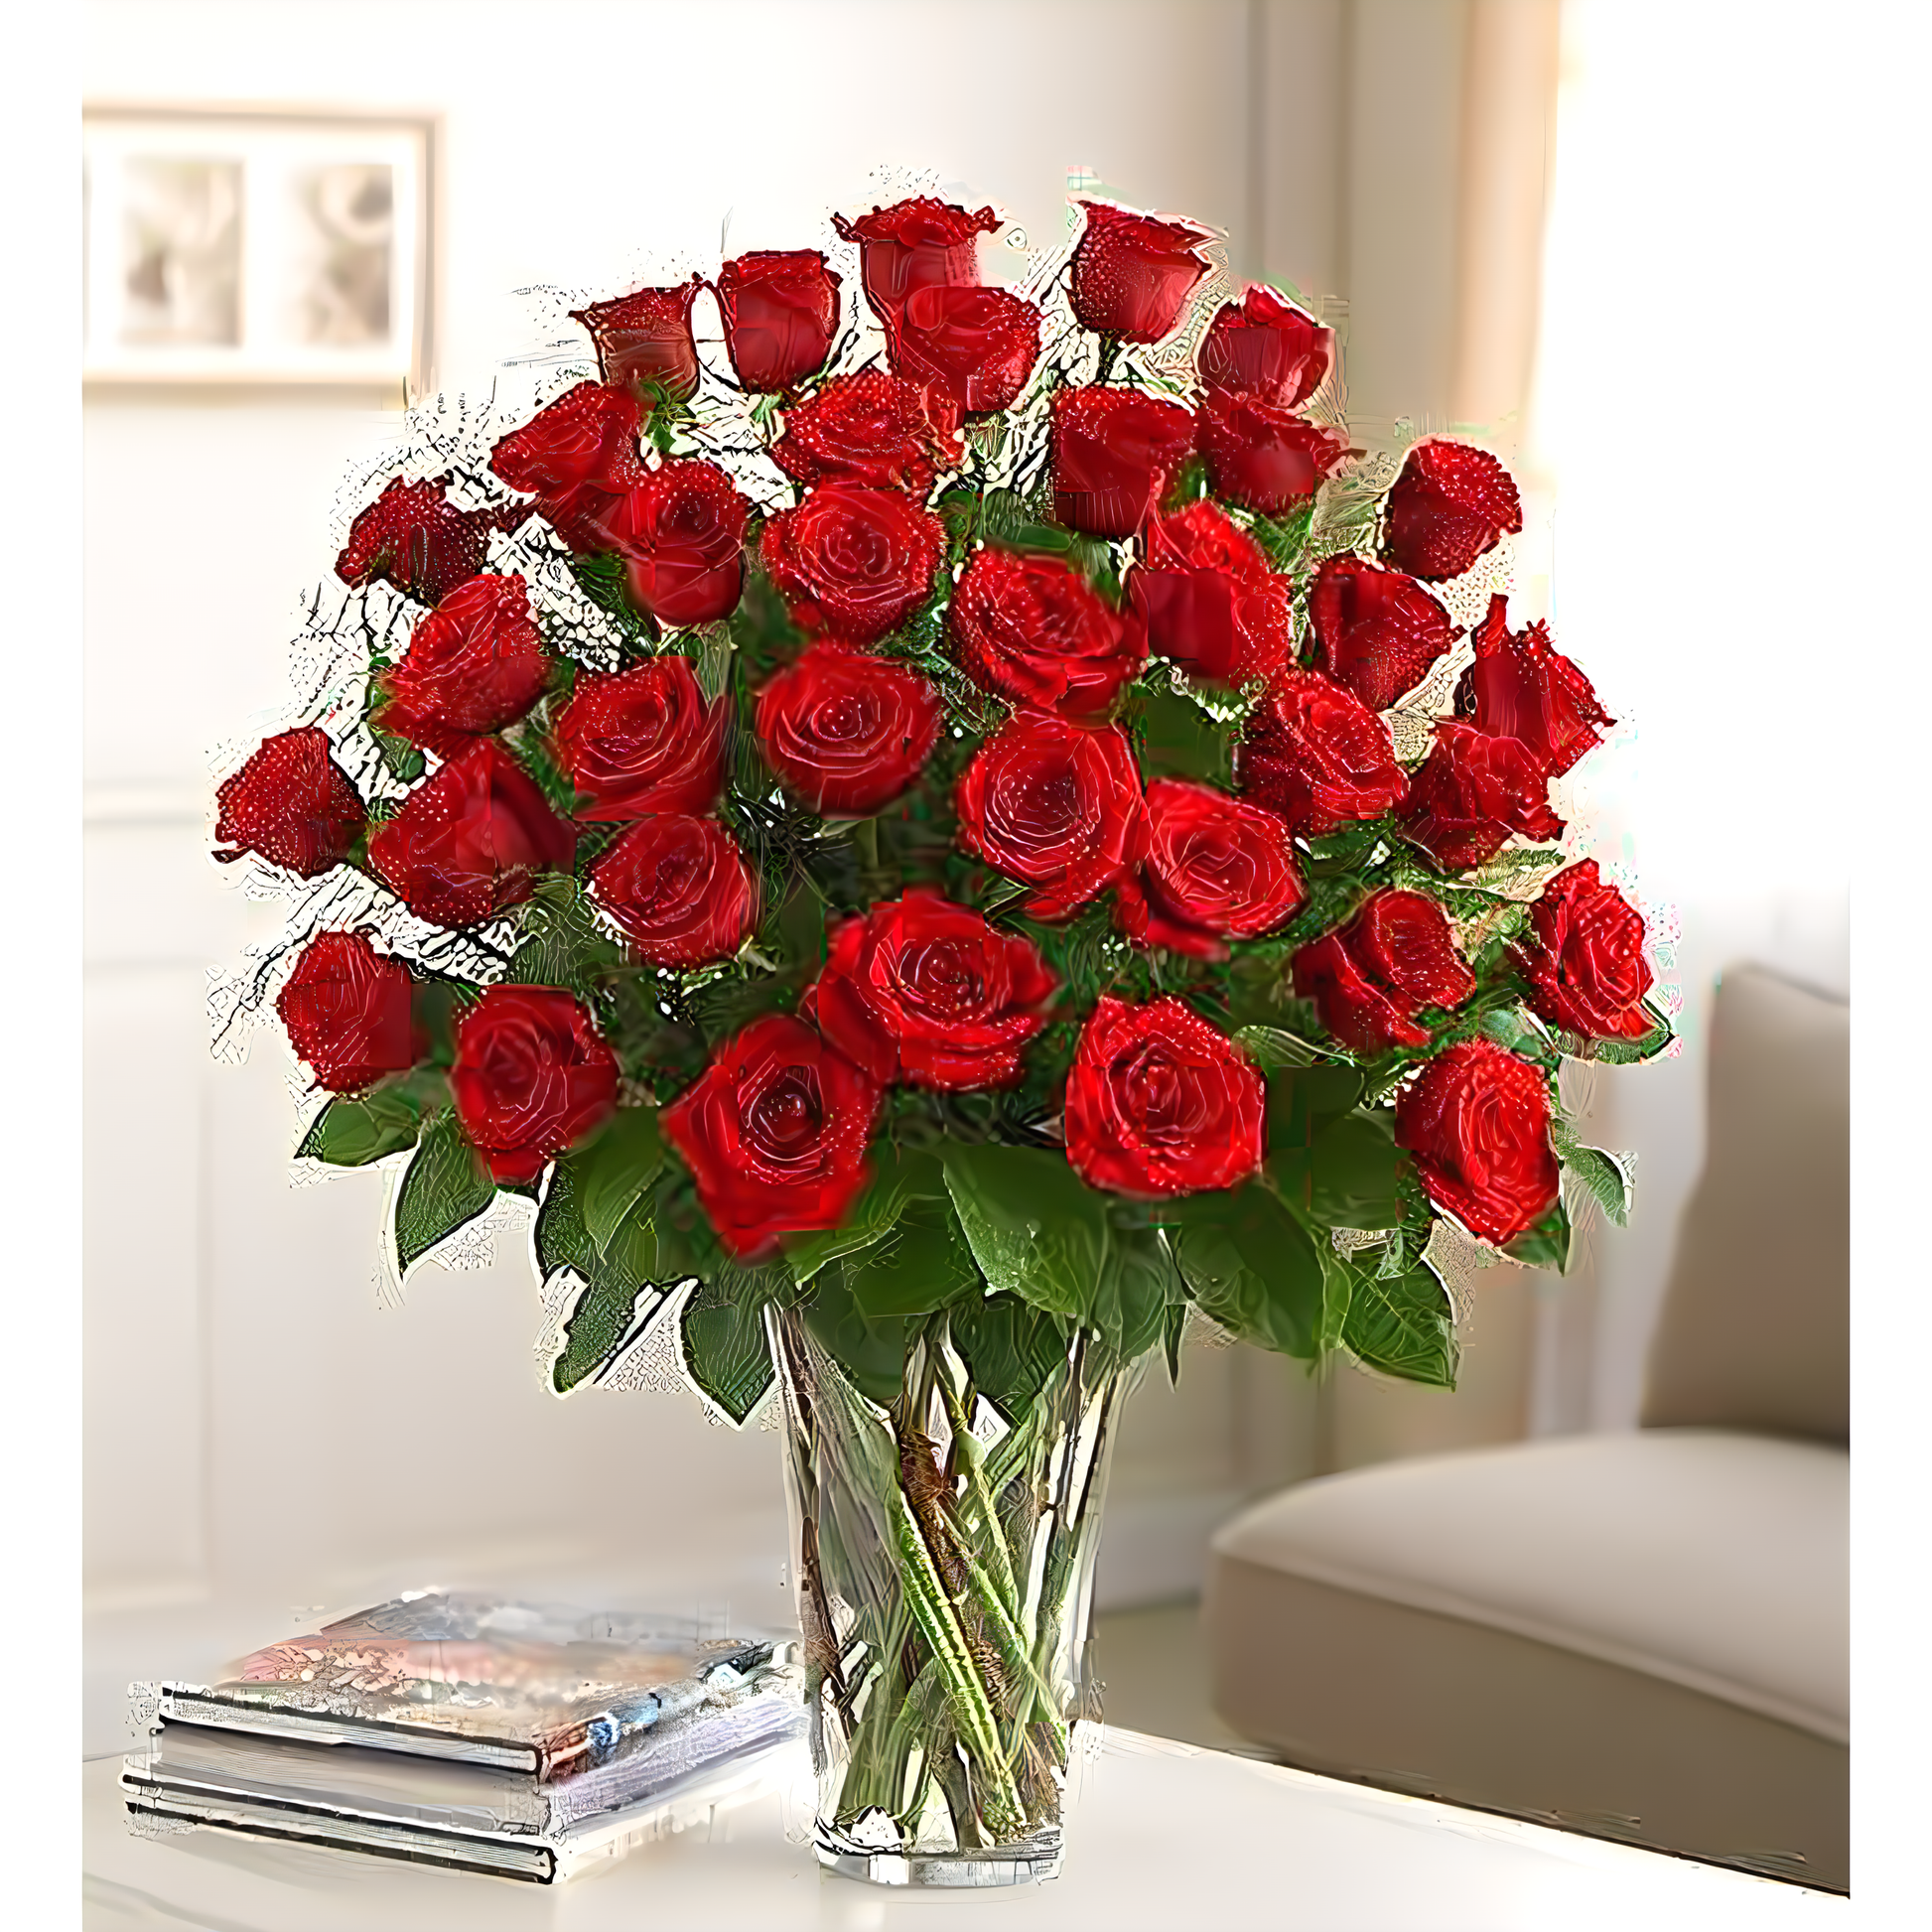 NYC Flower Delivery - Three Dozen Roses for Sympathy - Funeral > For the Service